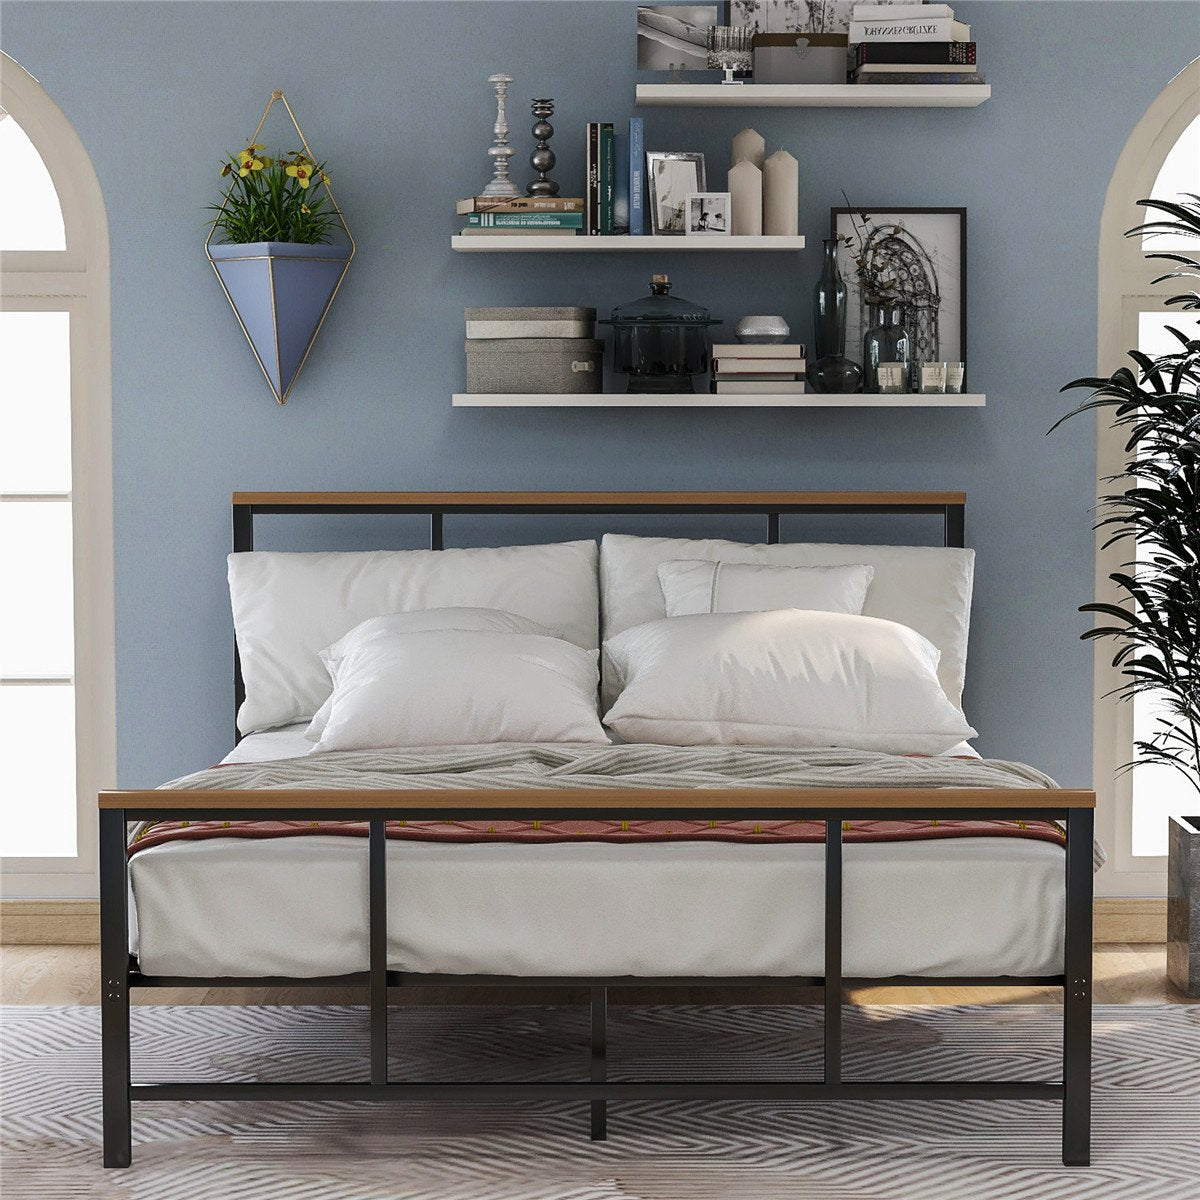 Metal Bed with Wood Decoration